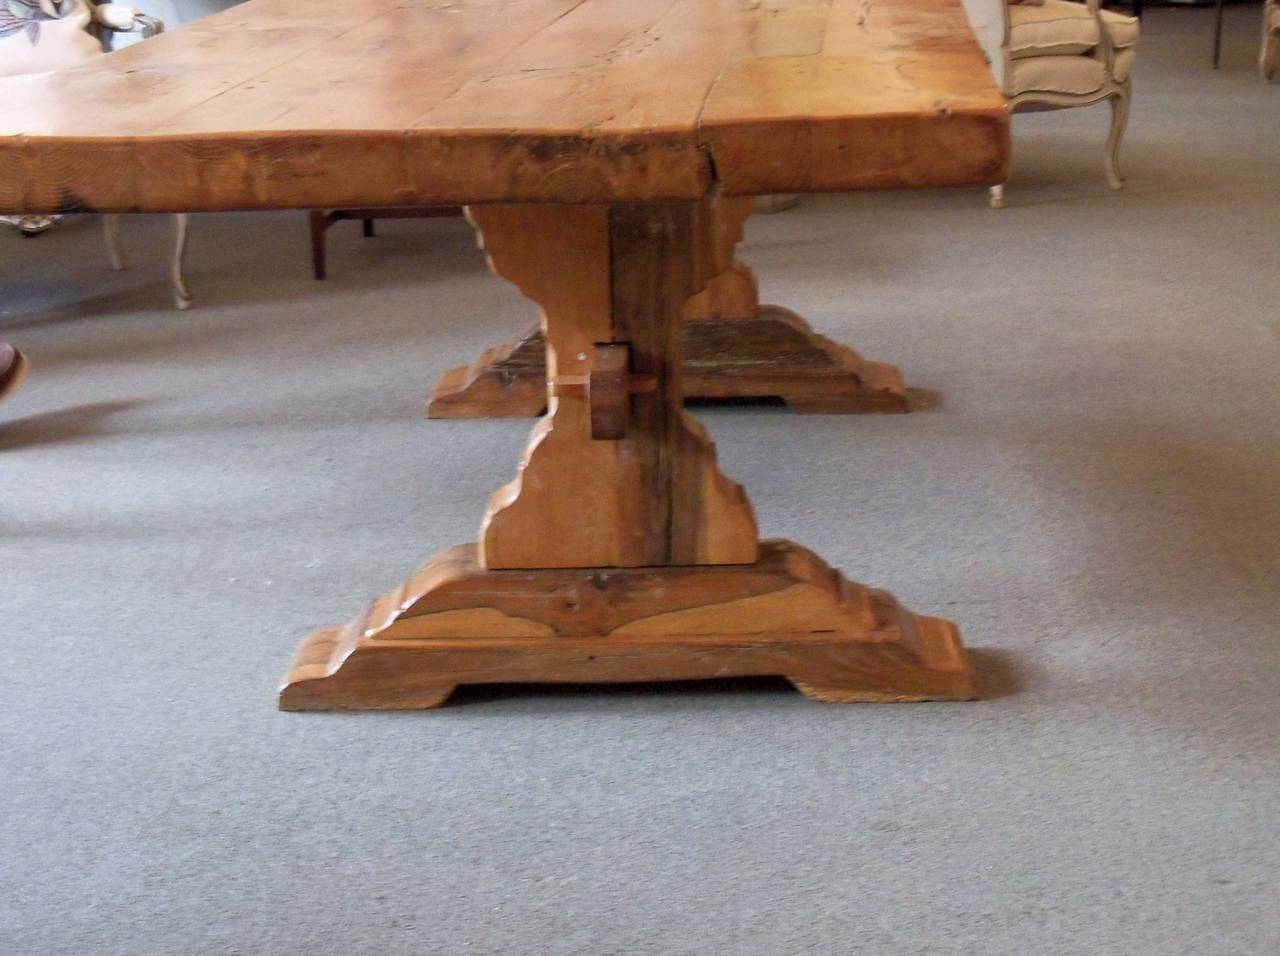 This lovely old French oak table is quite a substantial and impressive one. The very thick (2.5